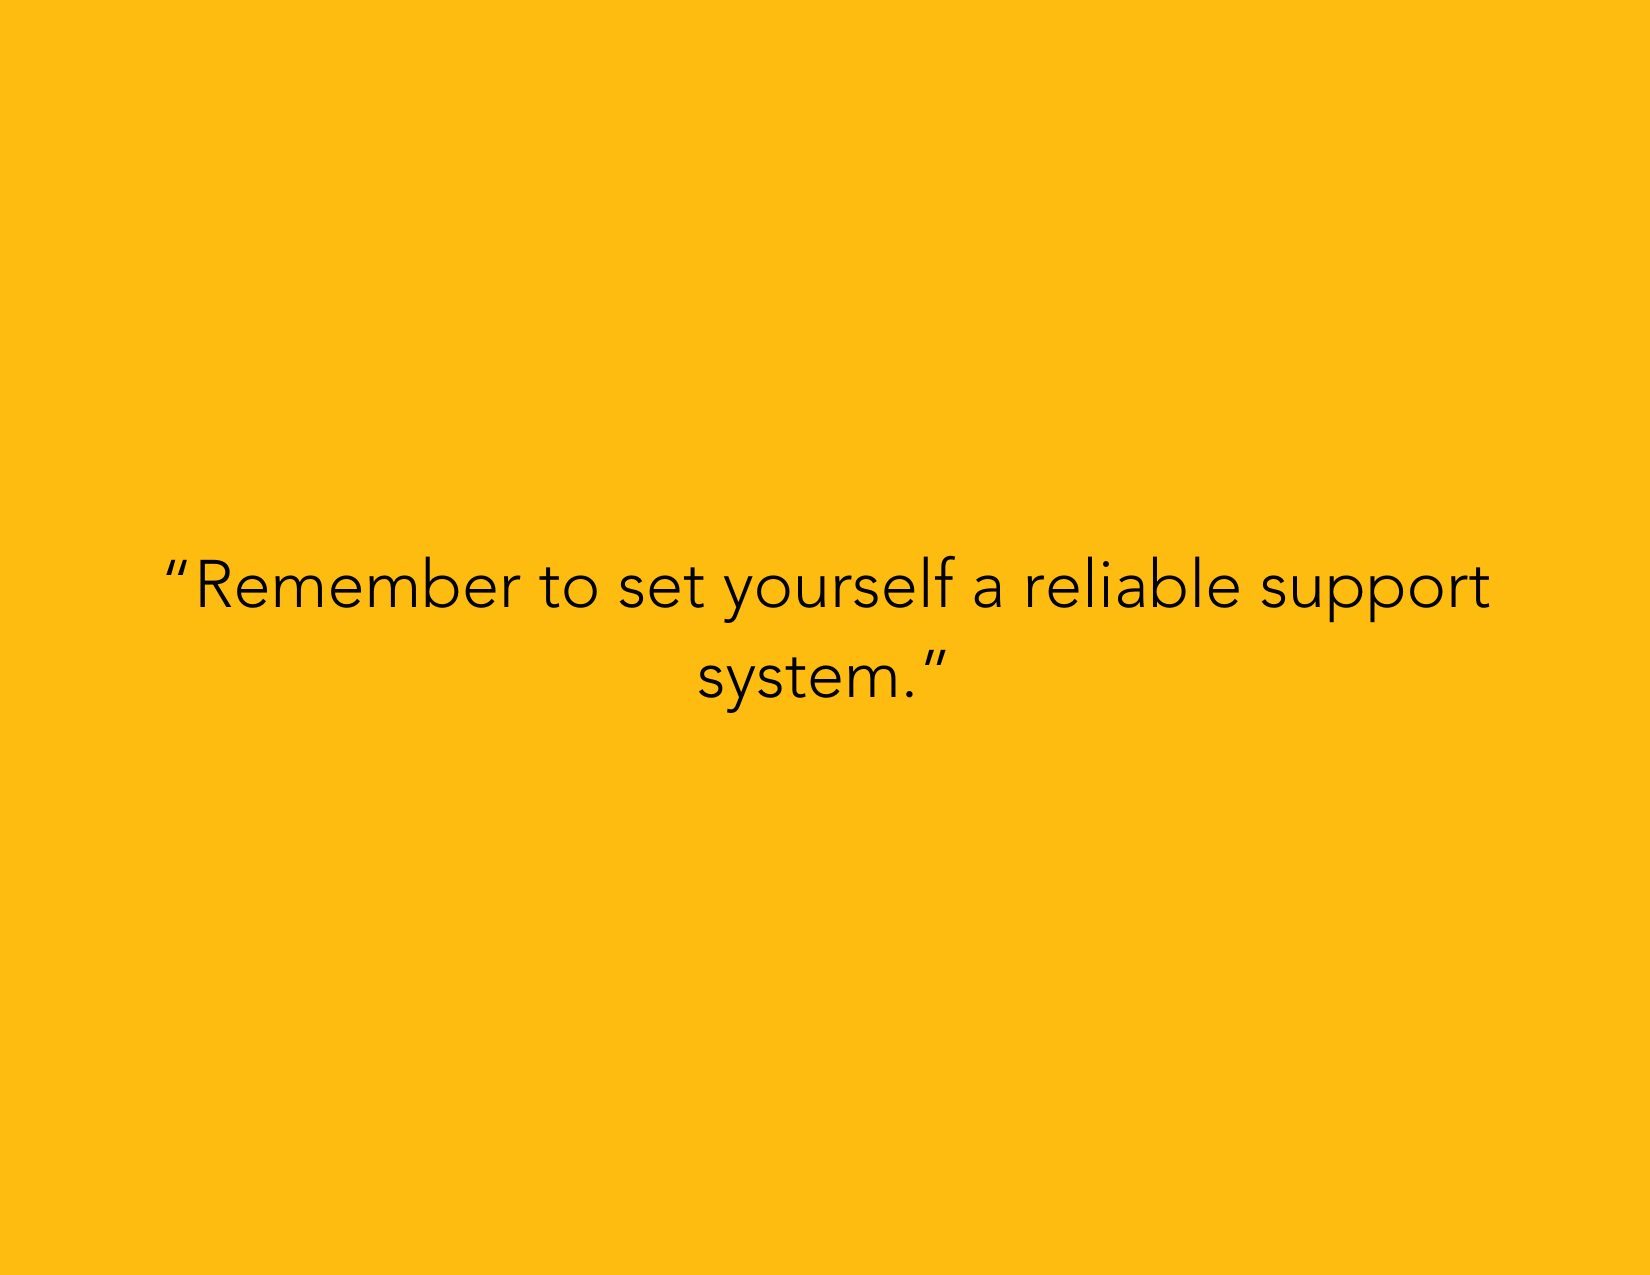 “Remember to set yourself a reliable support system.”